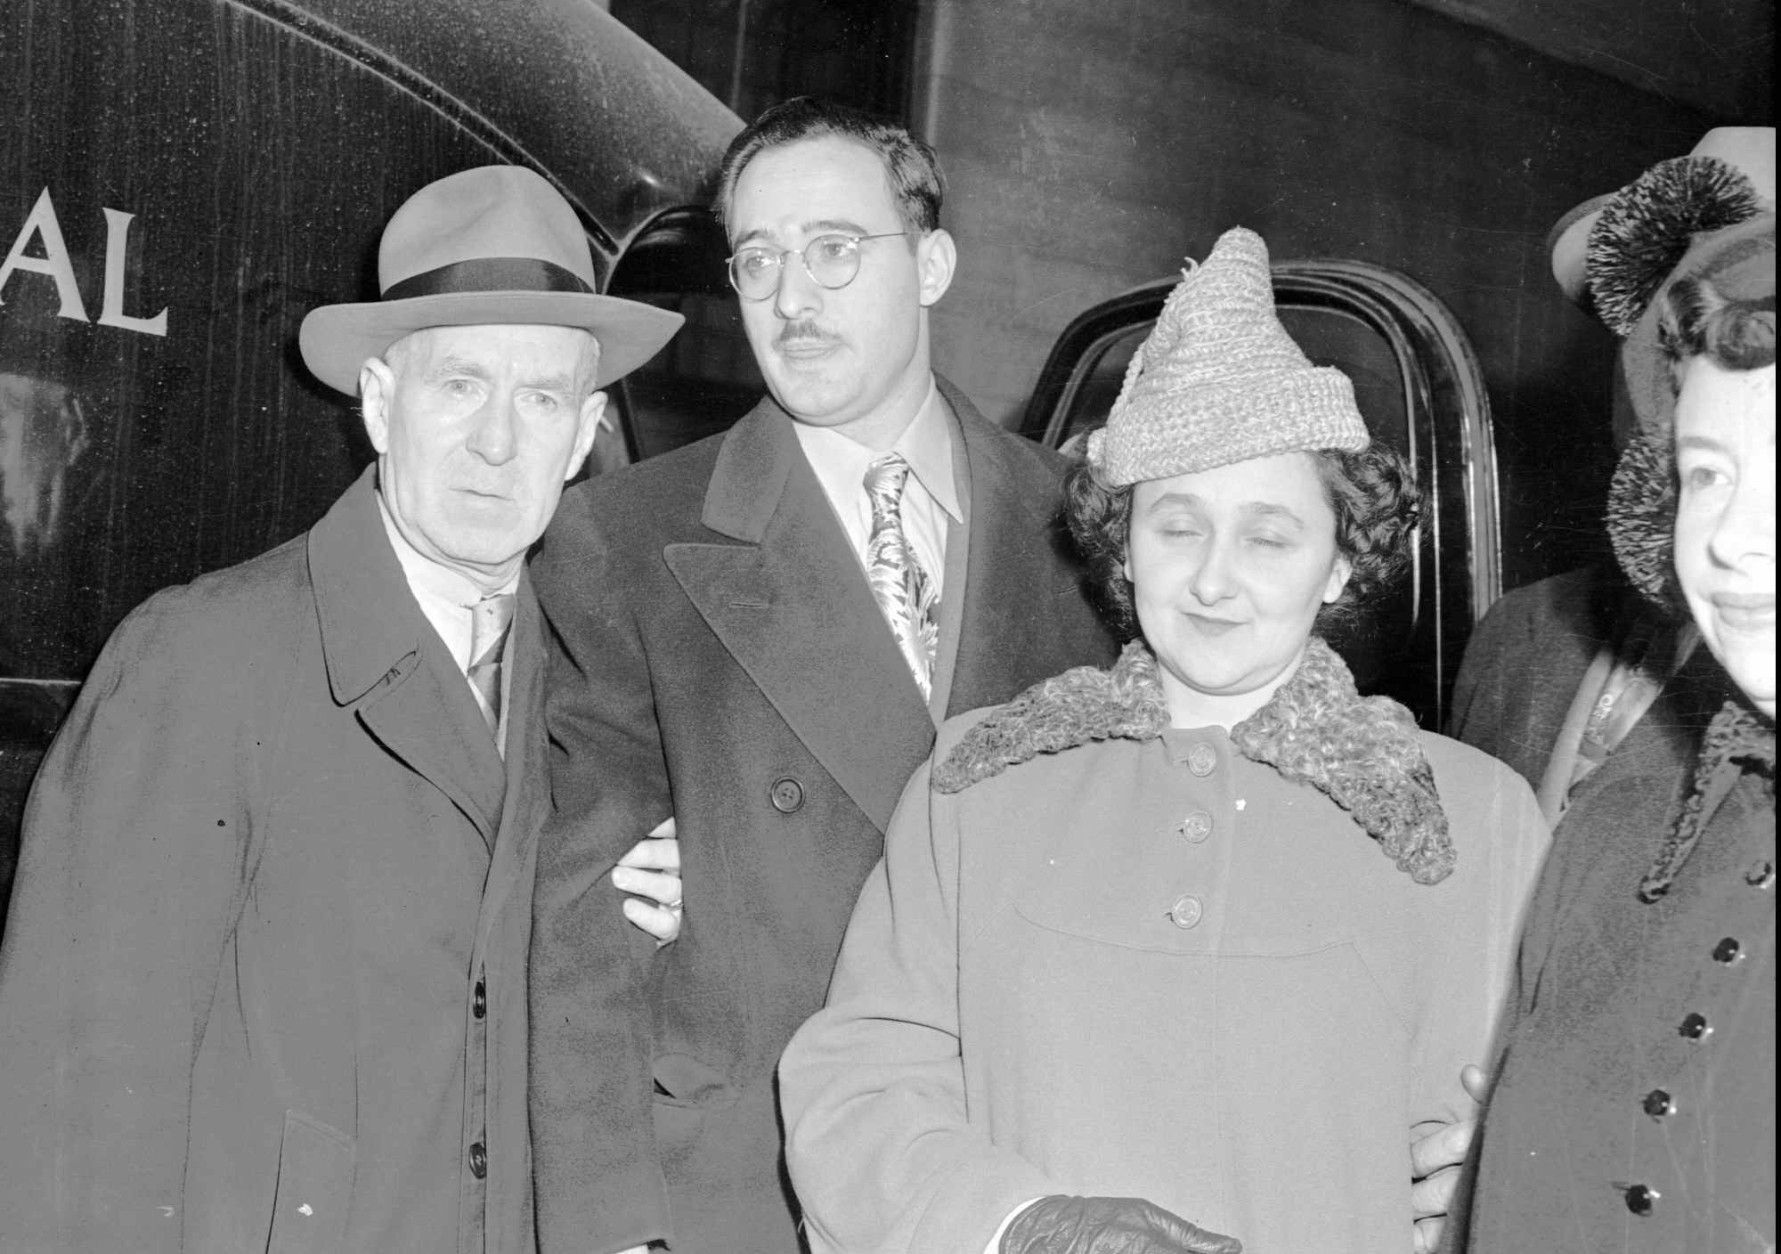 FILE--Mr. and Mrs. Julius Rosenberg, center, shown in this 1951 file photo, were charged by the U.S. government to commit espionage by transmitting national secrets to Soviet Russia. The CIA and National Security Agency released 49 messages between Moscow and its KGB operatives in New York and Washington that were intercepted in the mid-1940s and painstakingly decoded by cryptology experts at the Army Signal Intelligence Service, a forerunner of the NSA.  The materials ``may lay to rest a major Cold War controversy. ... Were the Rosenbergs guilty?'' NSA historian-in-residence David Kahn told reporters Tuesday, July 11, 1995 for a ceremonial release of the papers at CIA headquarters. (AP Photo/File)